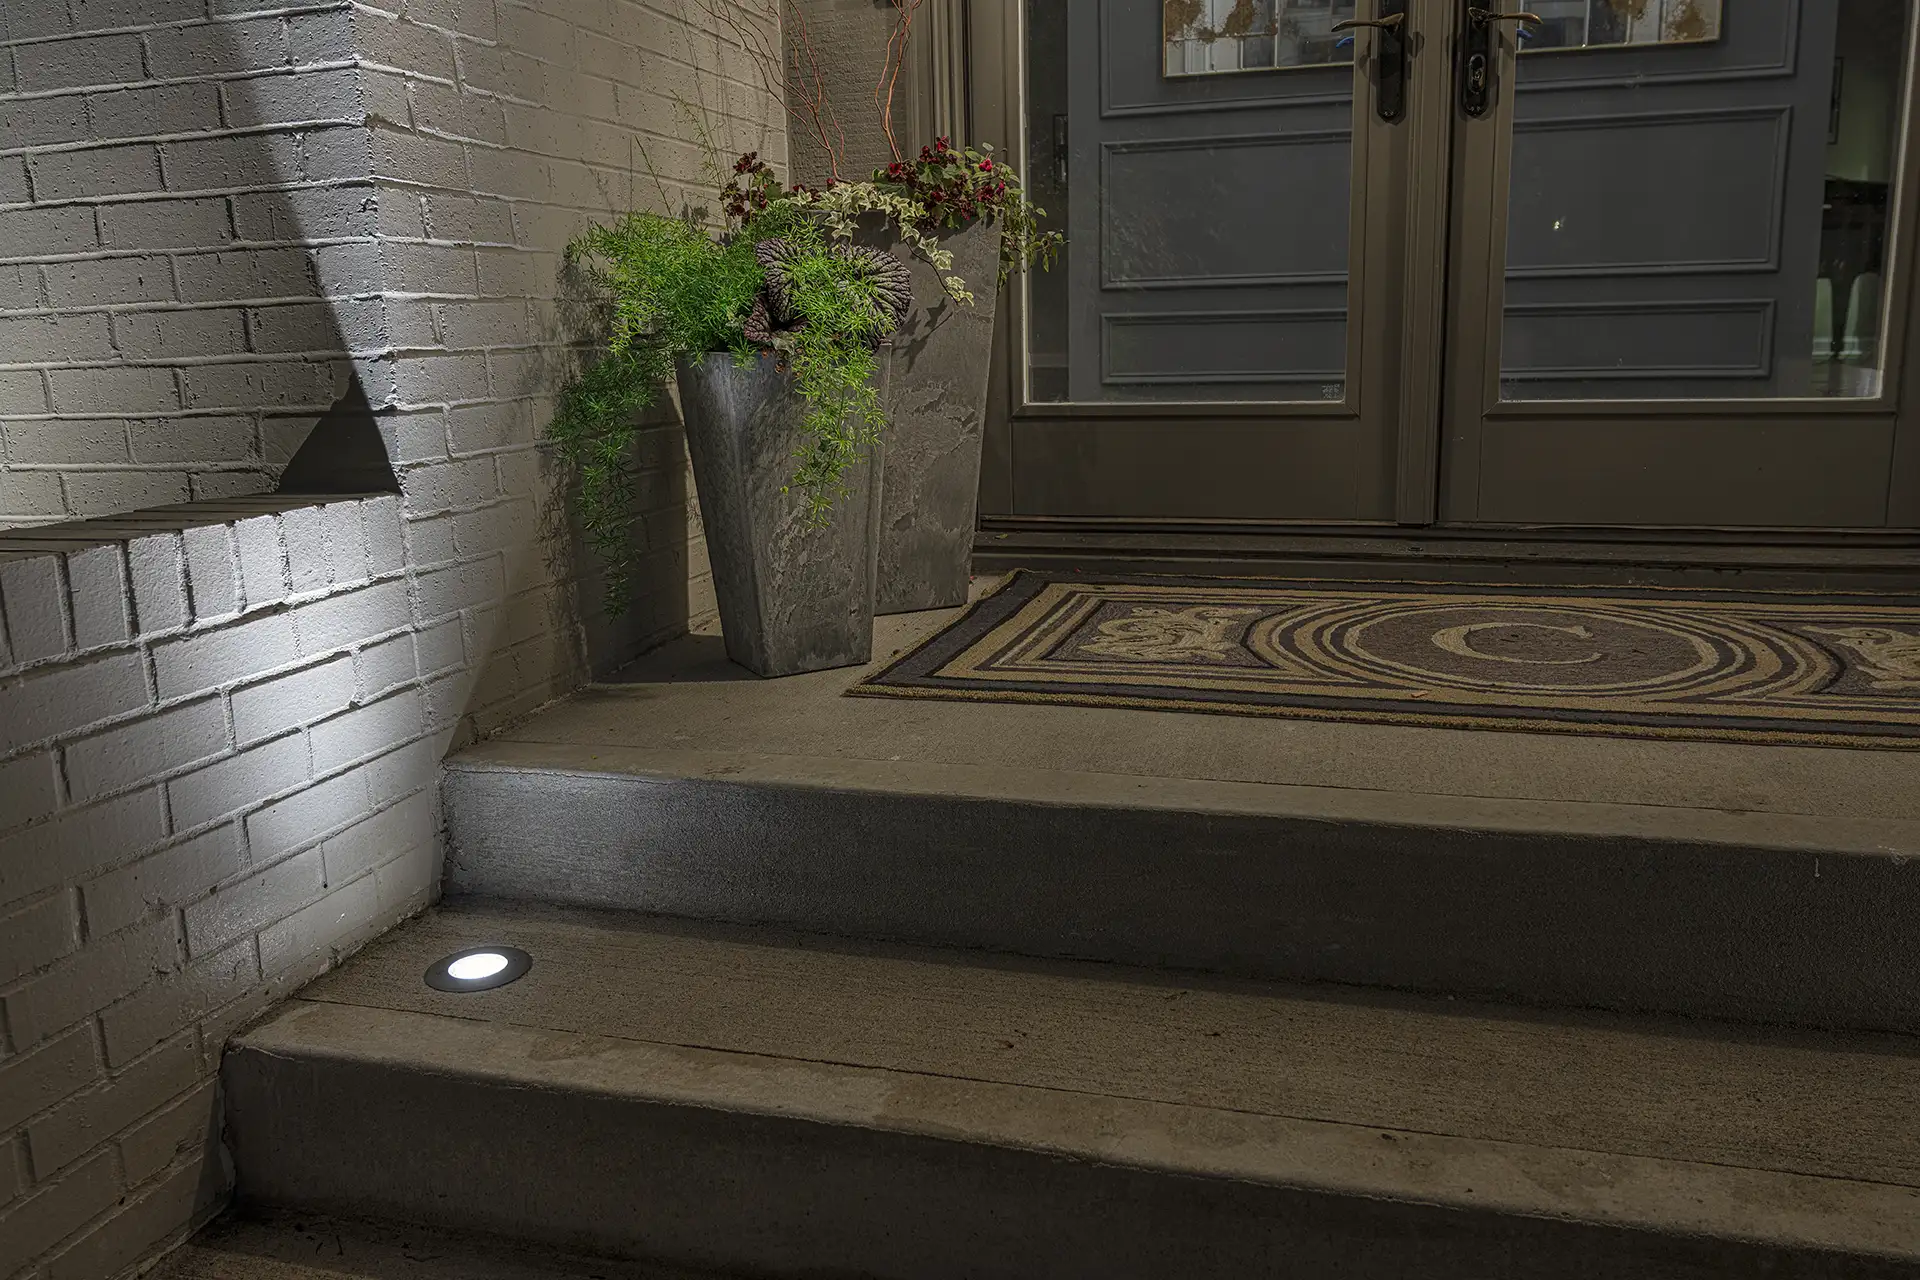 Campbell residence image 5 can lighting in steps Lighthouse Outdoor Lighting and Audio Northern Virginia Washington DC